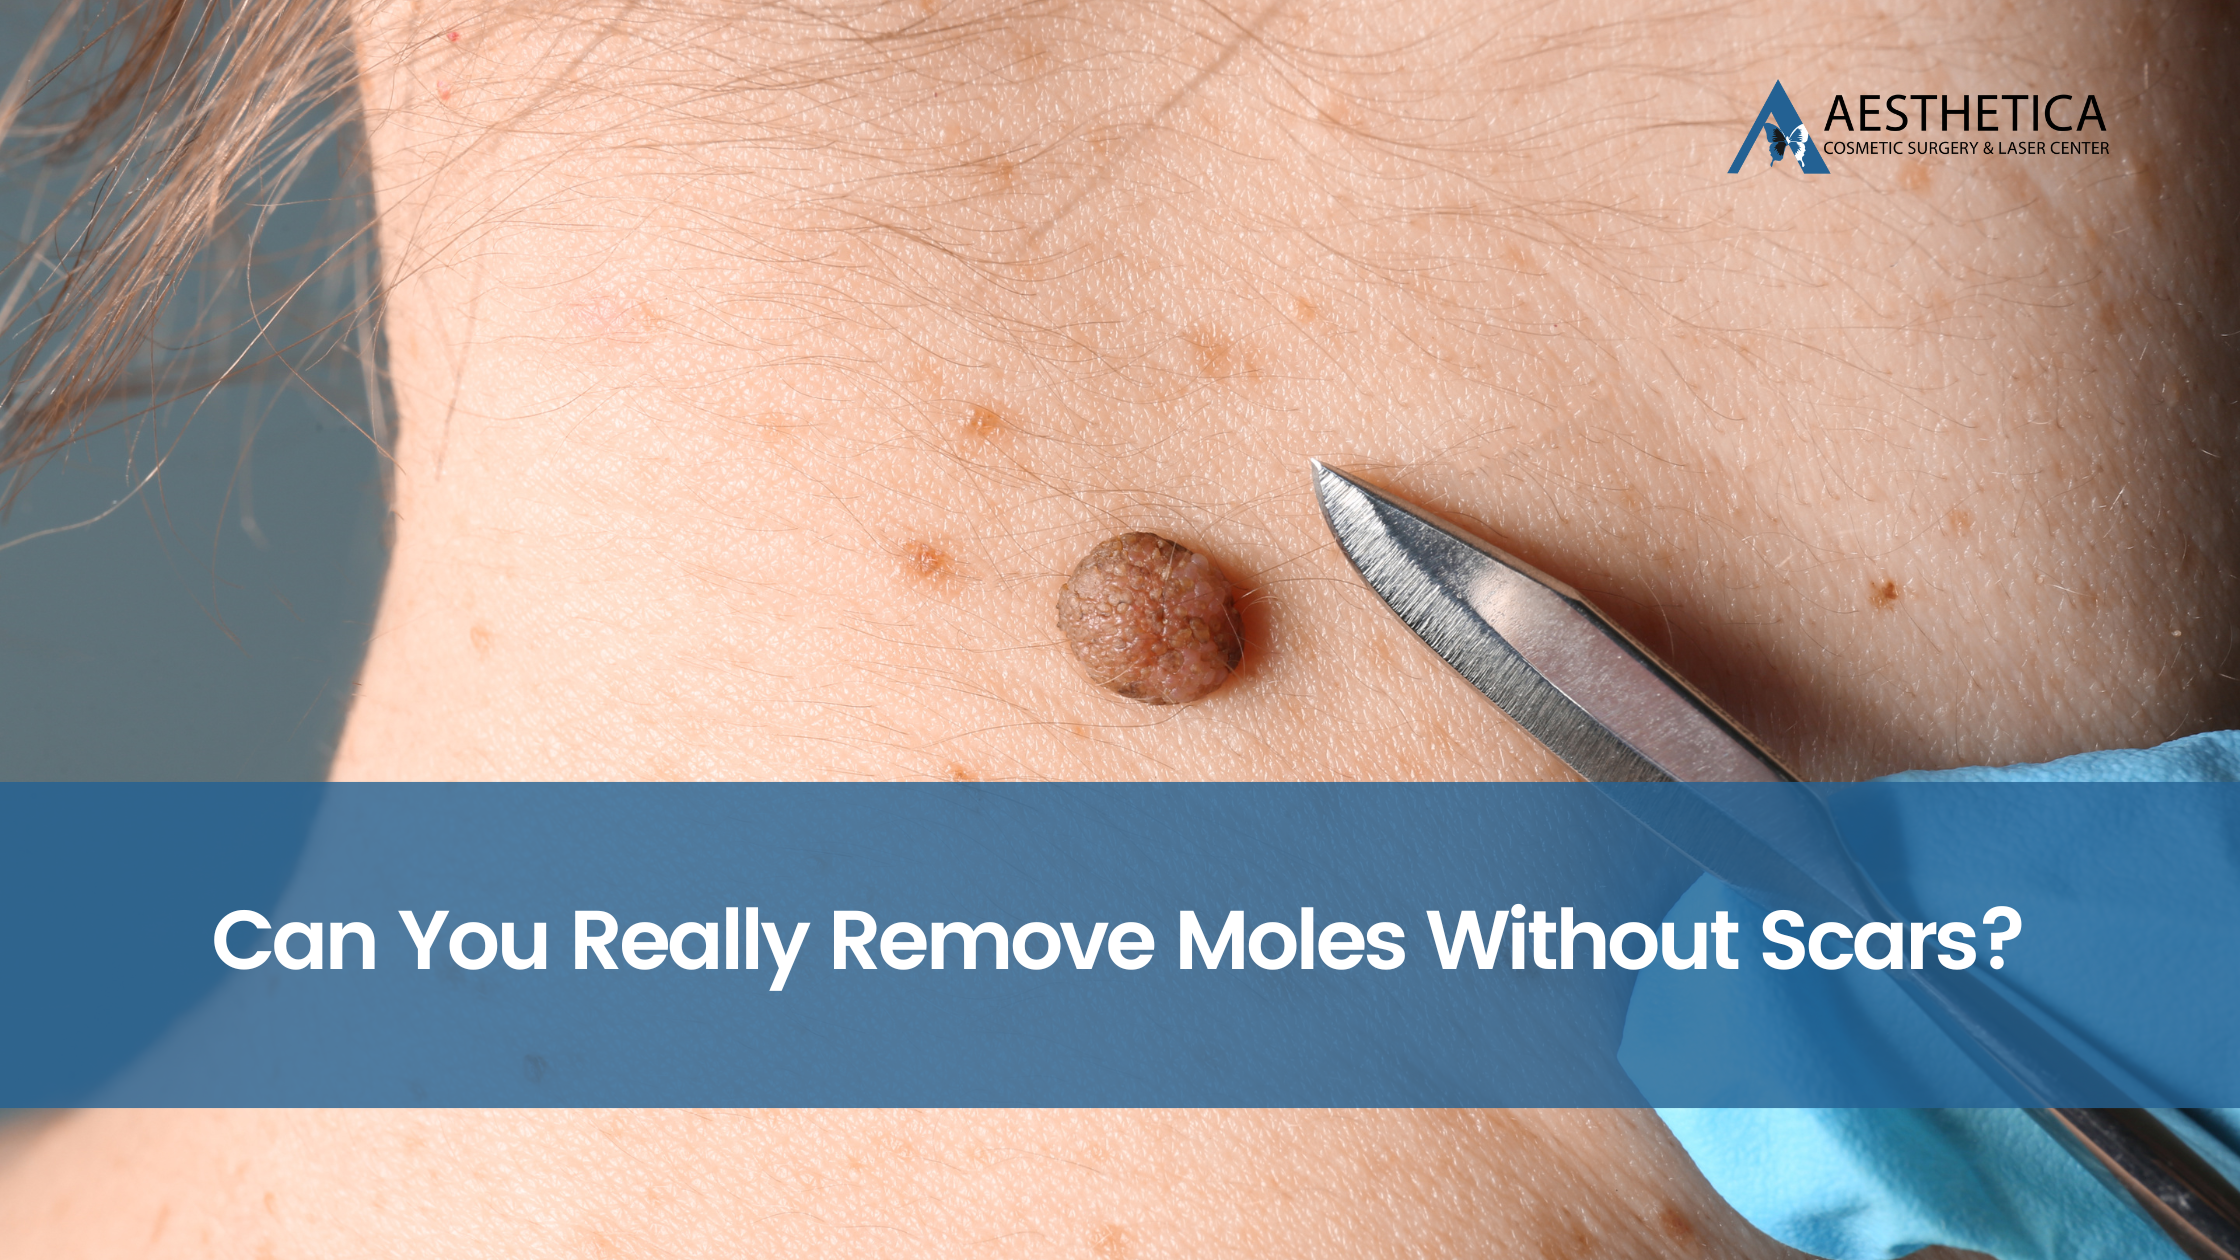 Can You Really Remove Moles Without Scars?